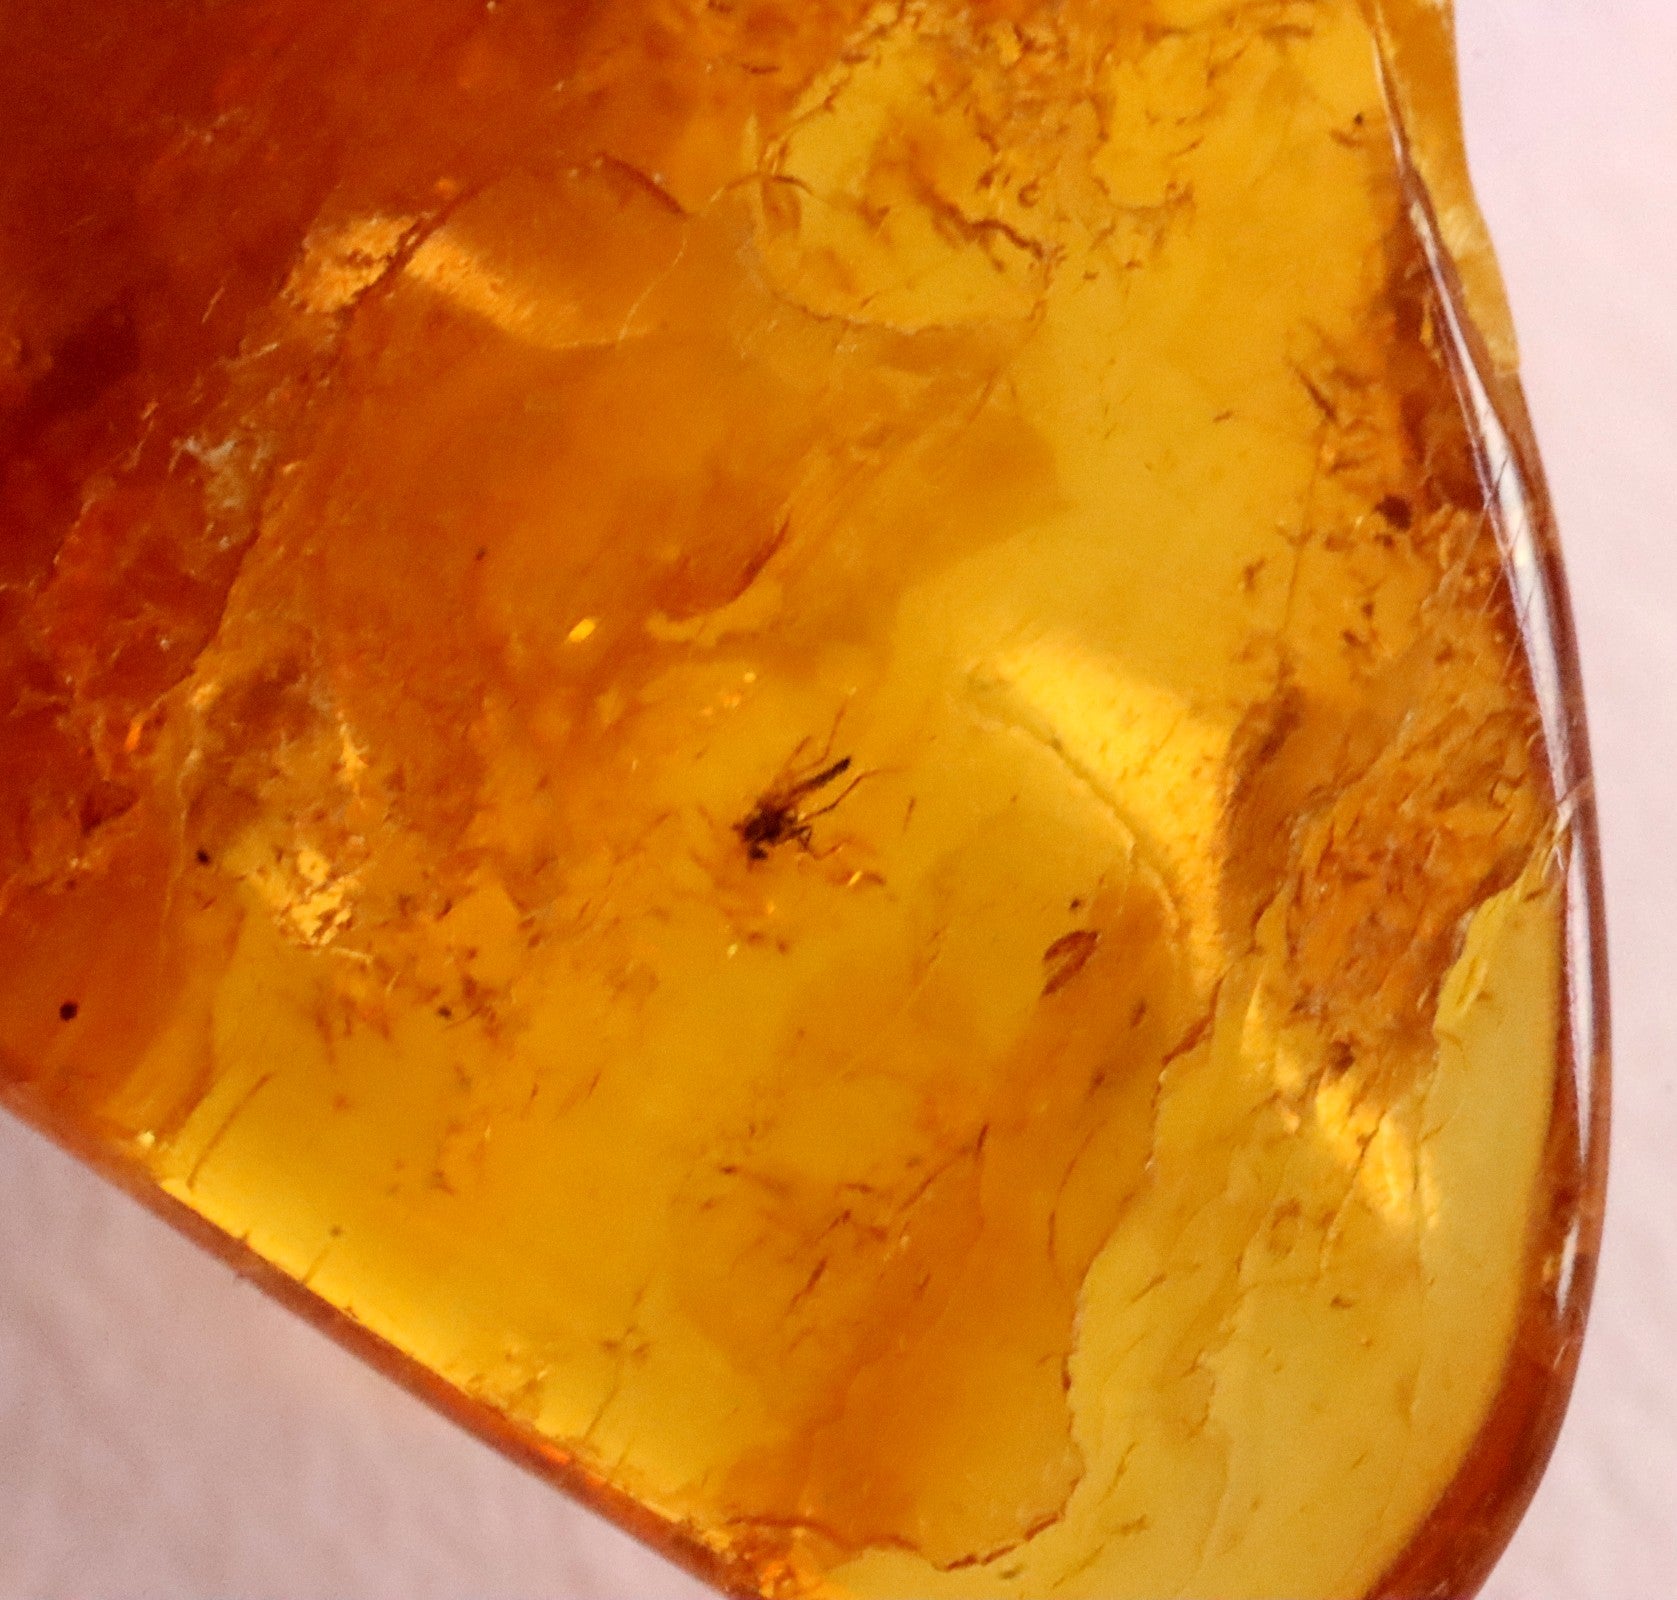 40 million year old Insect Inclusion in Amber